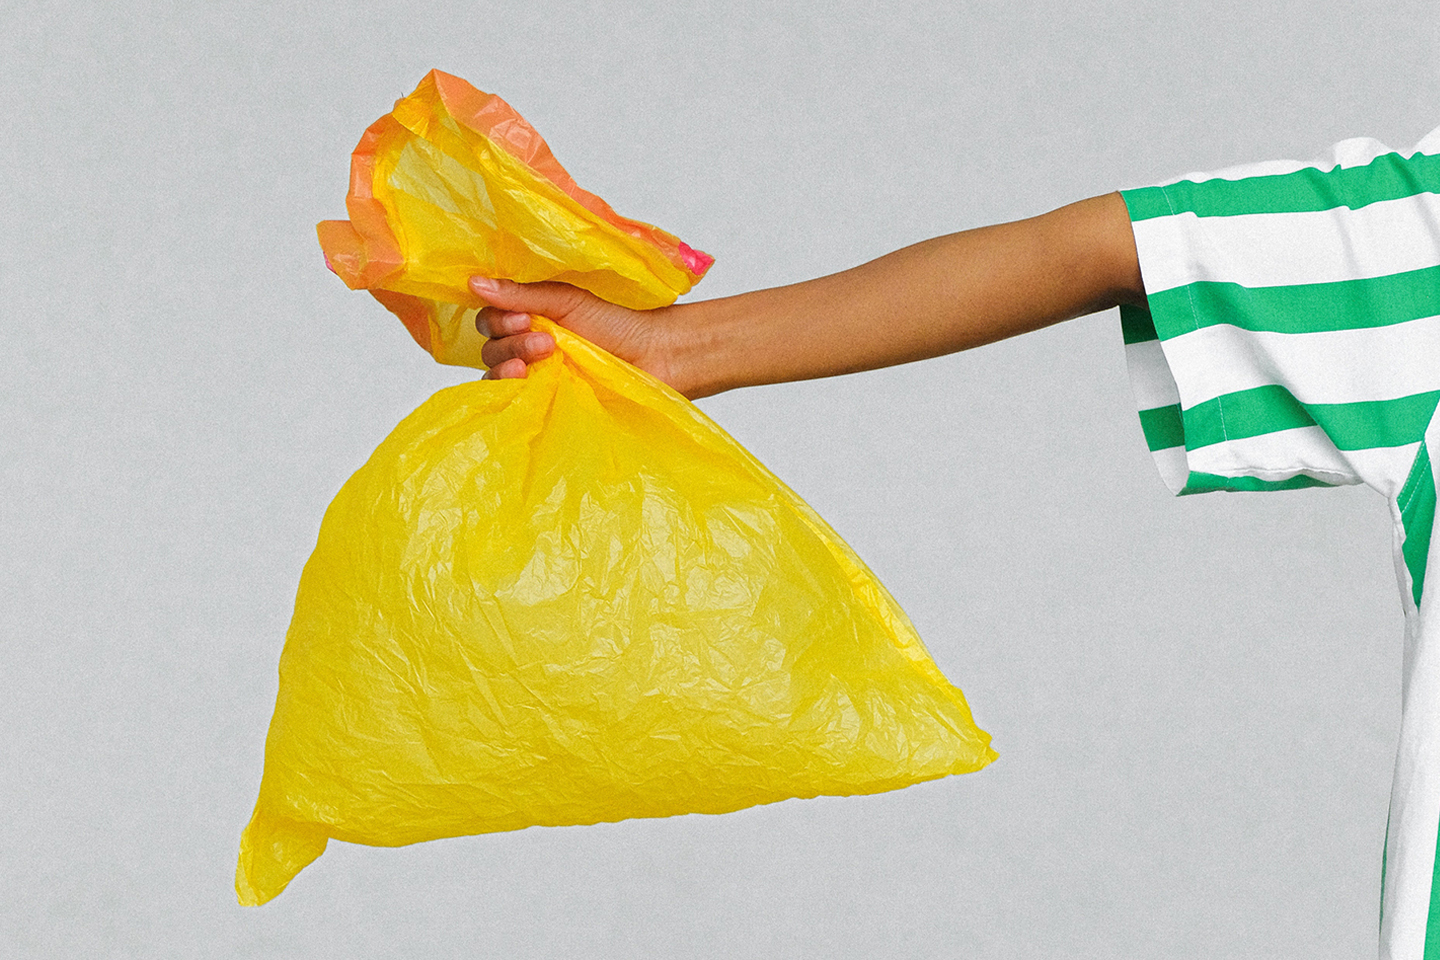 image of a person holding a bag of trash